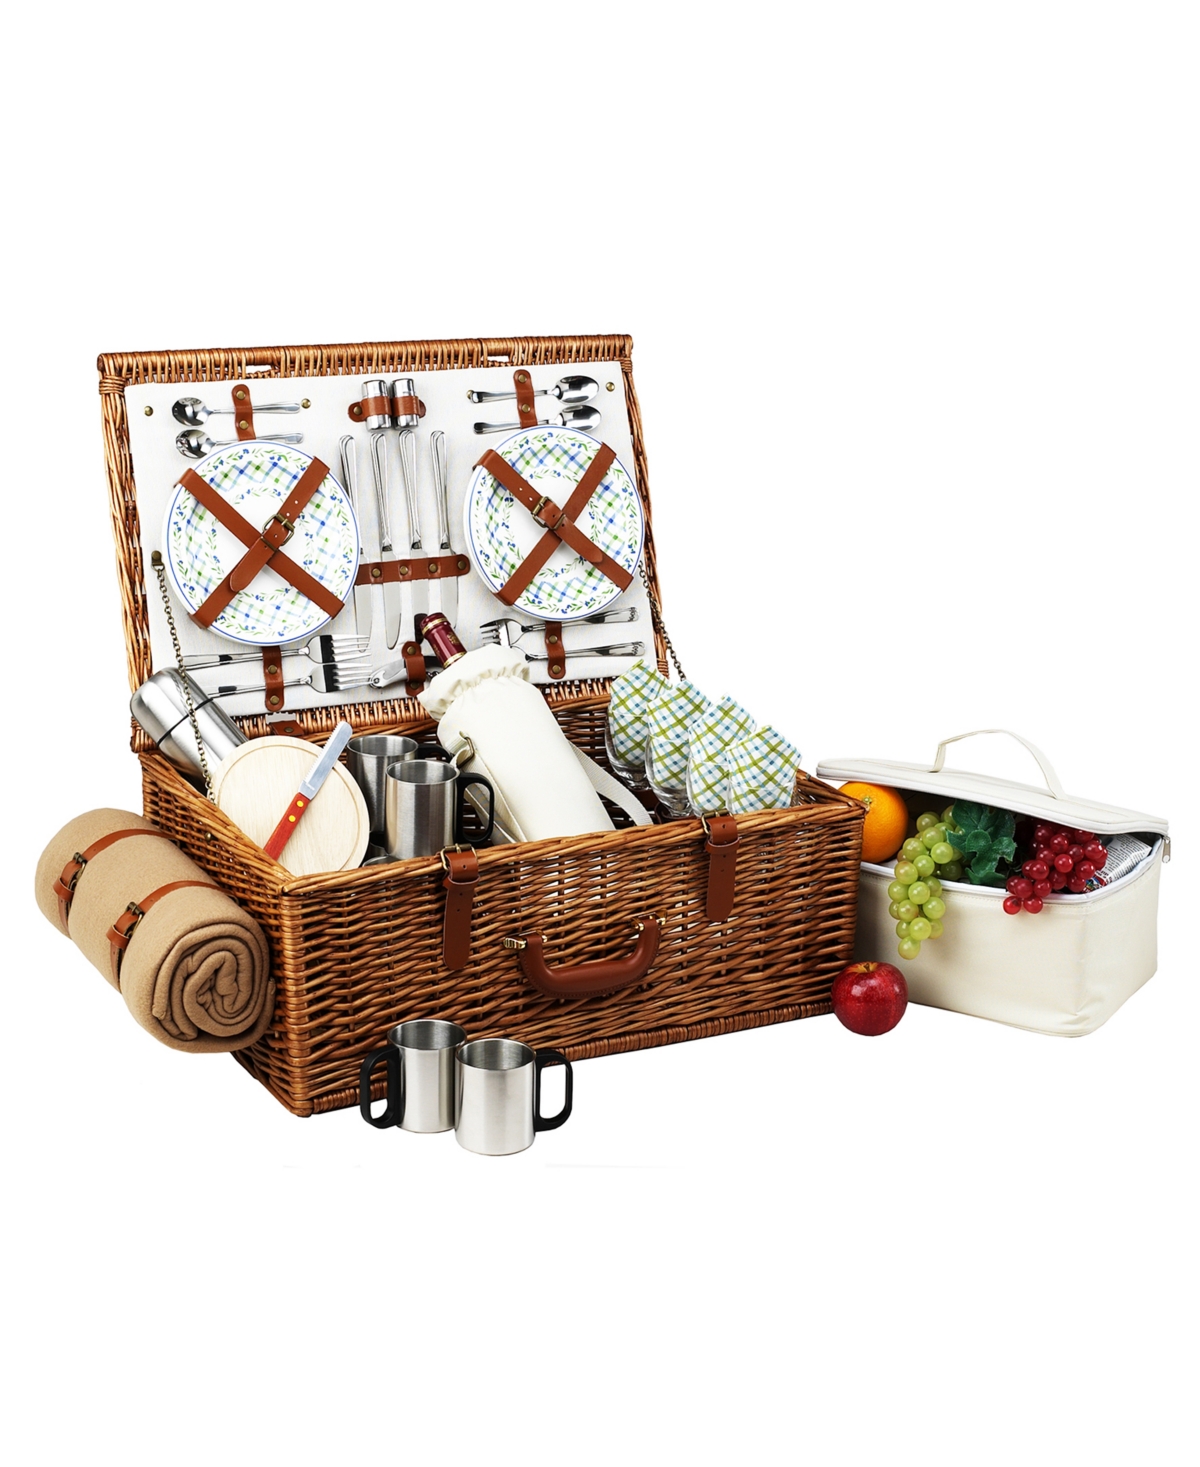 Dorset English-Style Picnic, Coffee Basket for 4 with Blanket - Turquoise